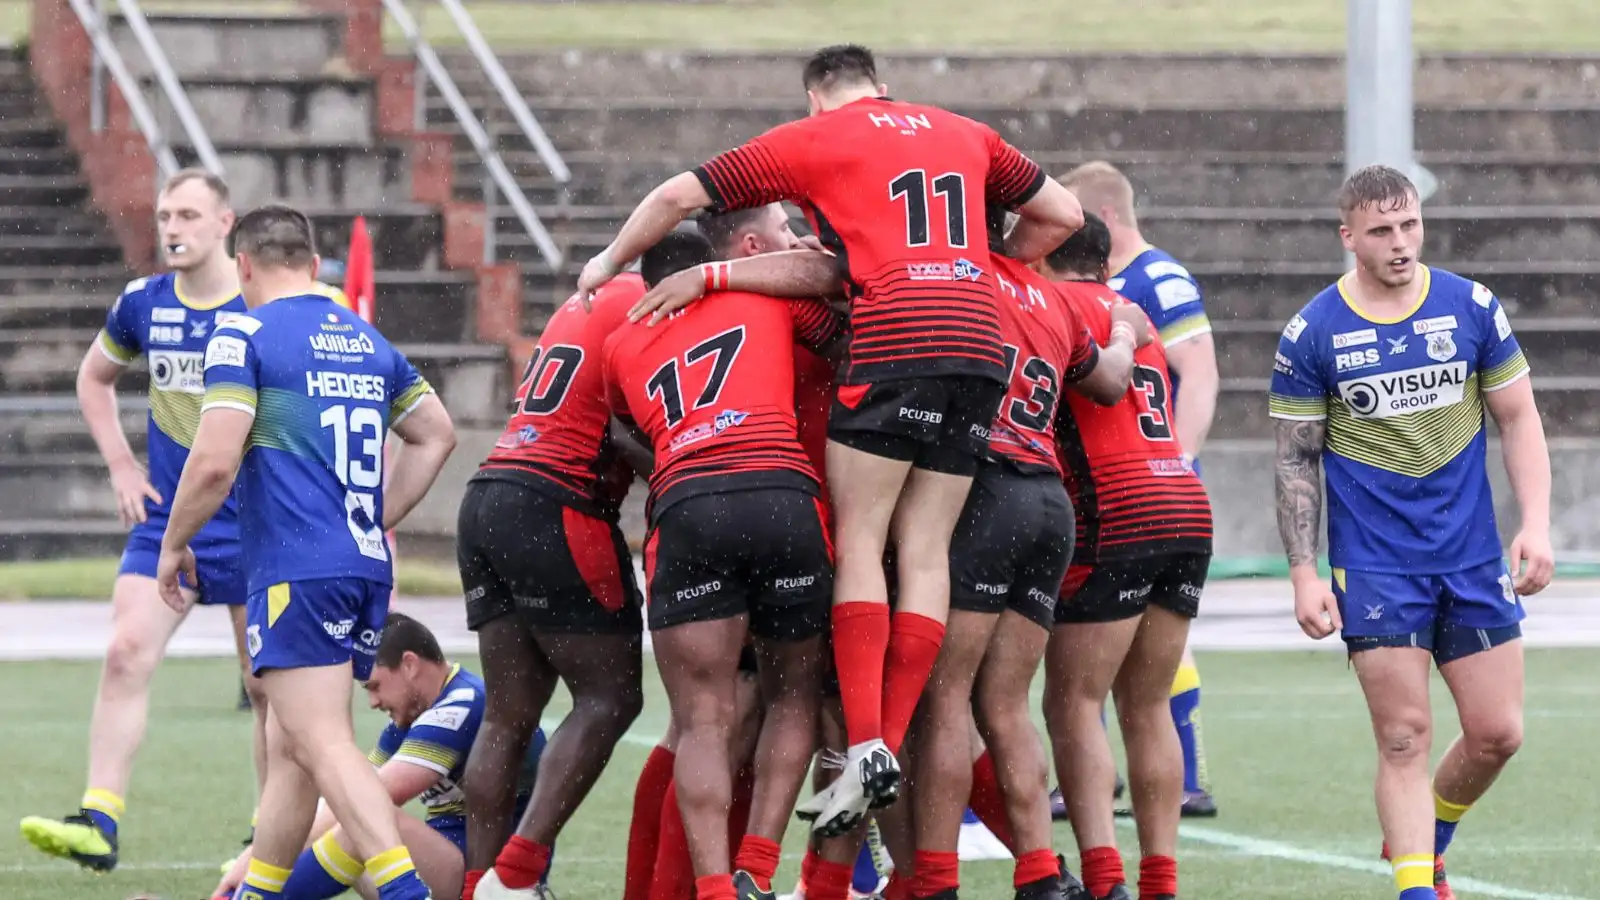 London Skolars set up JustGiving page, needing £10k to save club following withdrawal from League 1